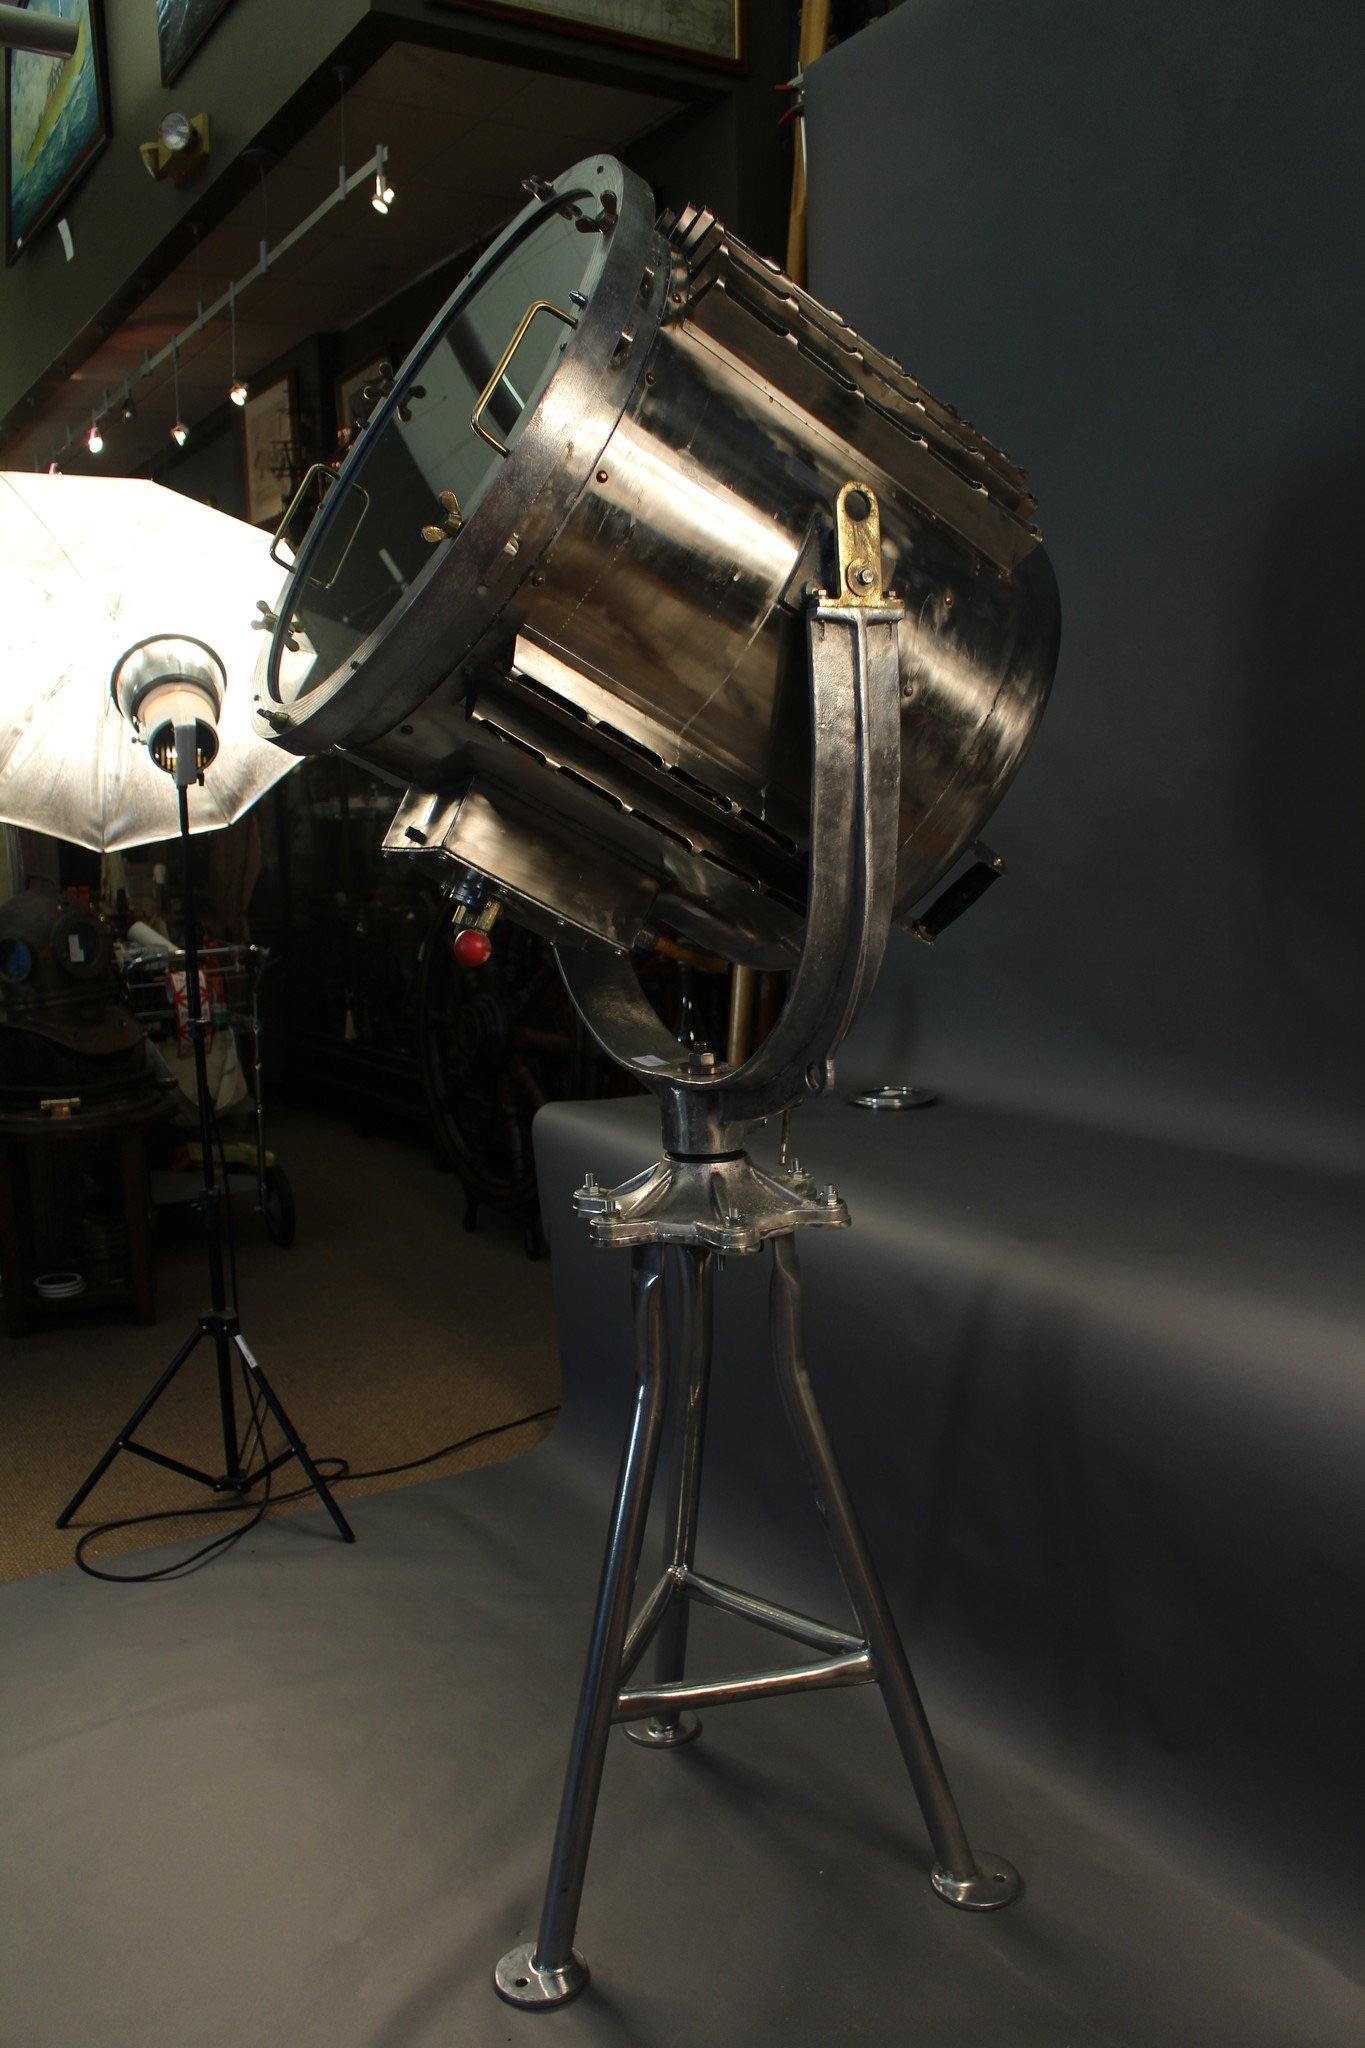 Huge six foot high aluminum spotlight with mounting yoke and fixed tripod stand. The light swivels on its base. Search light comes from a Suez Canal supertanker.

Overall dimensions: 27 1/12” bezel diameter x 30” deep x 82” H.
 